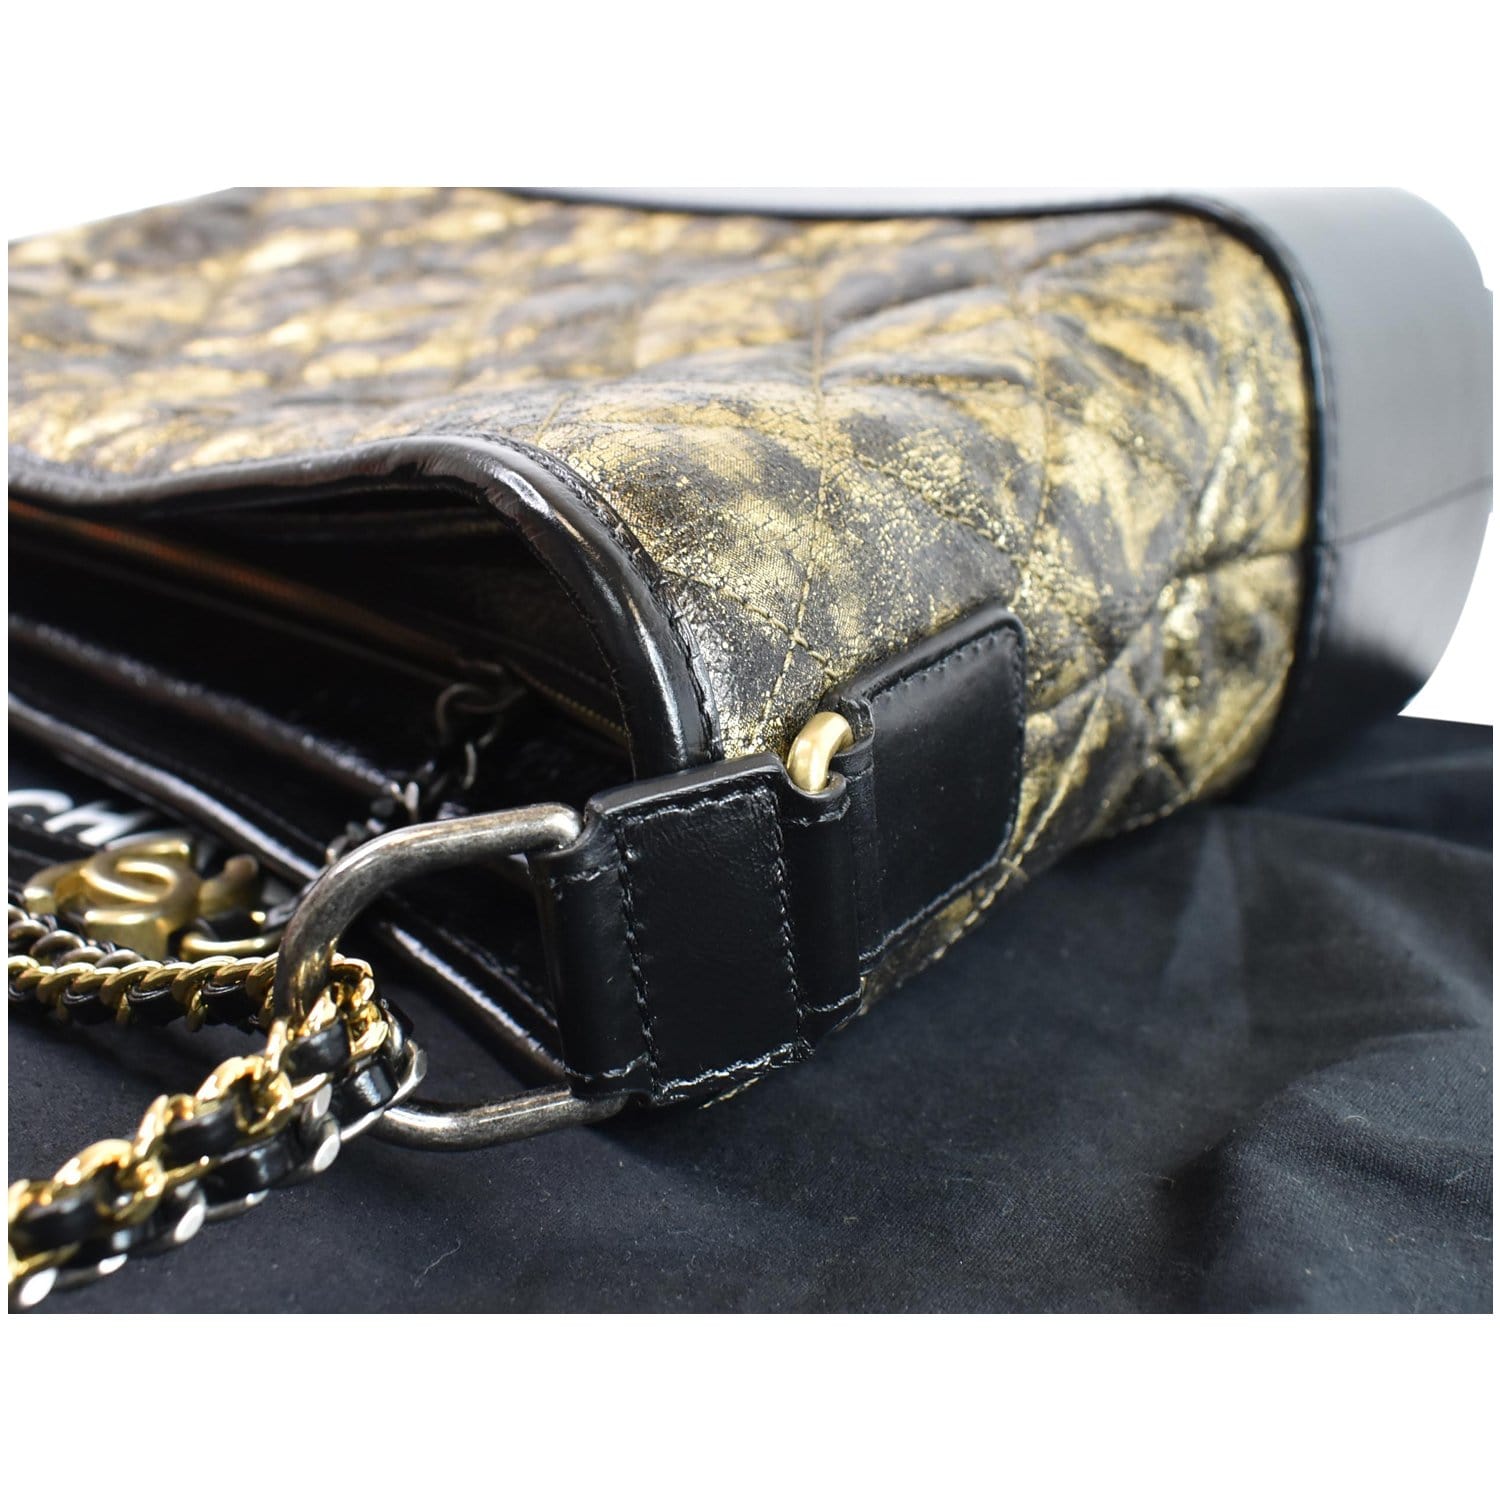 Chanel Gabrielle Clutch With Gold And Silver Chain